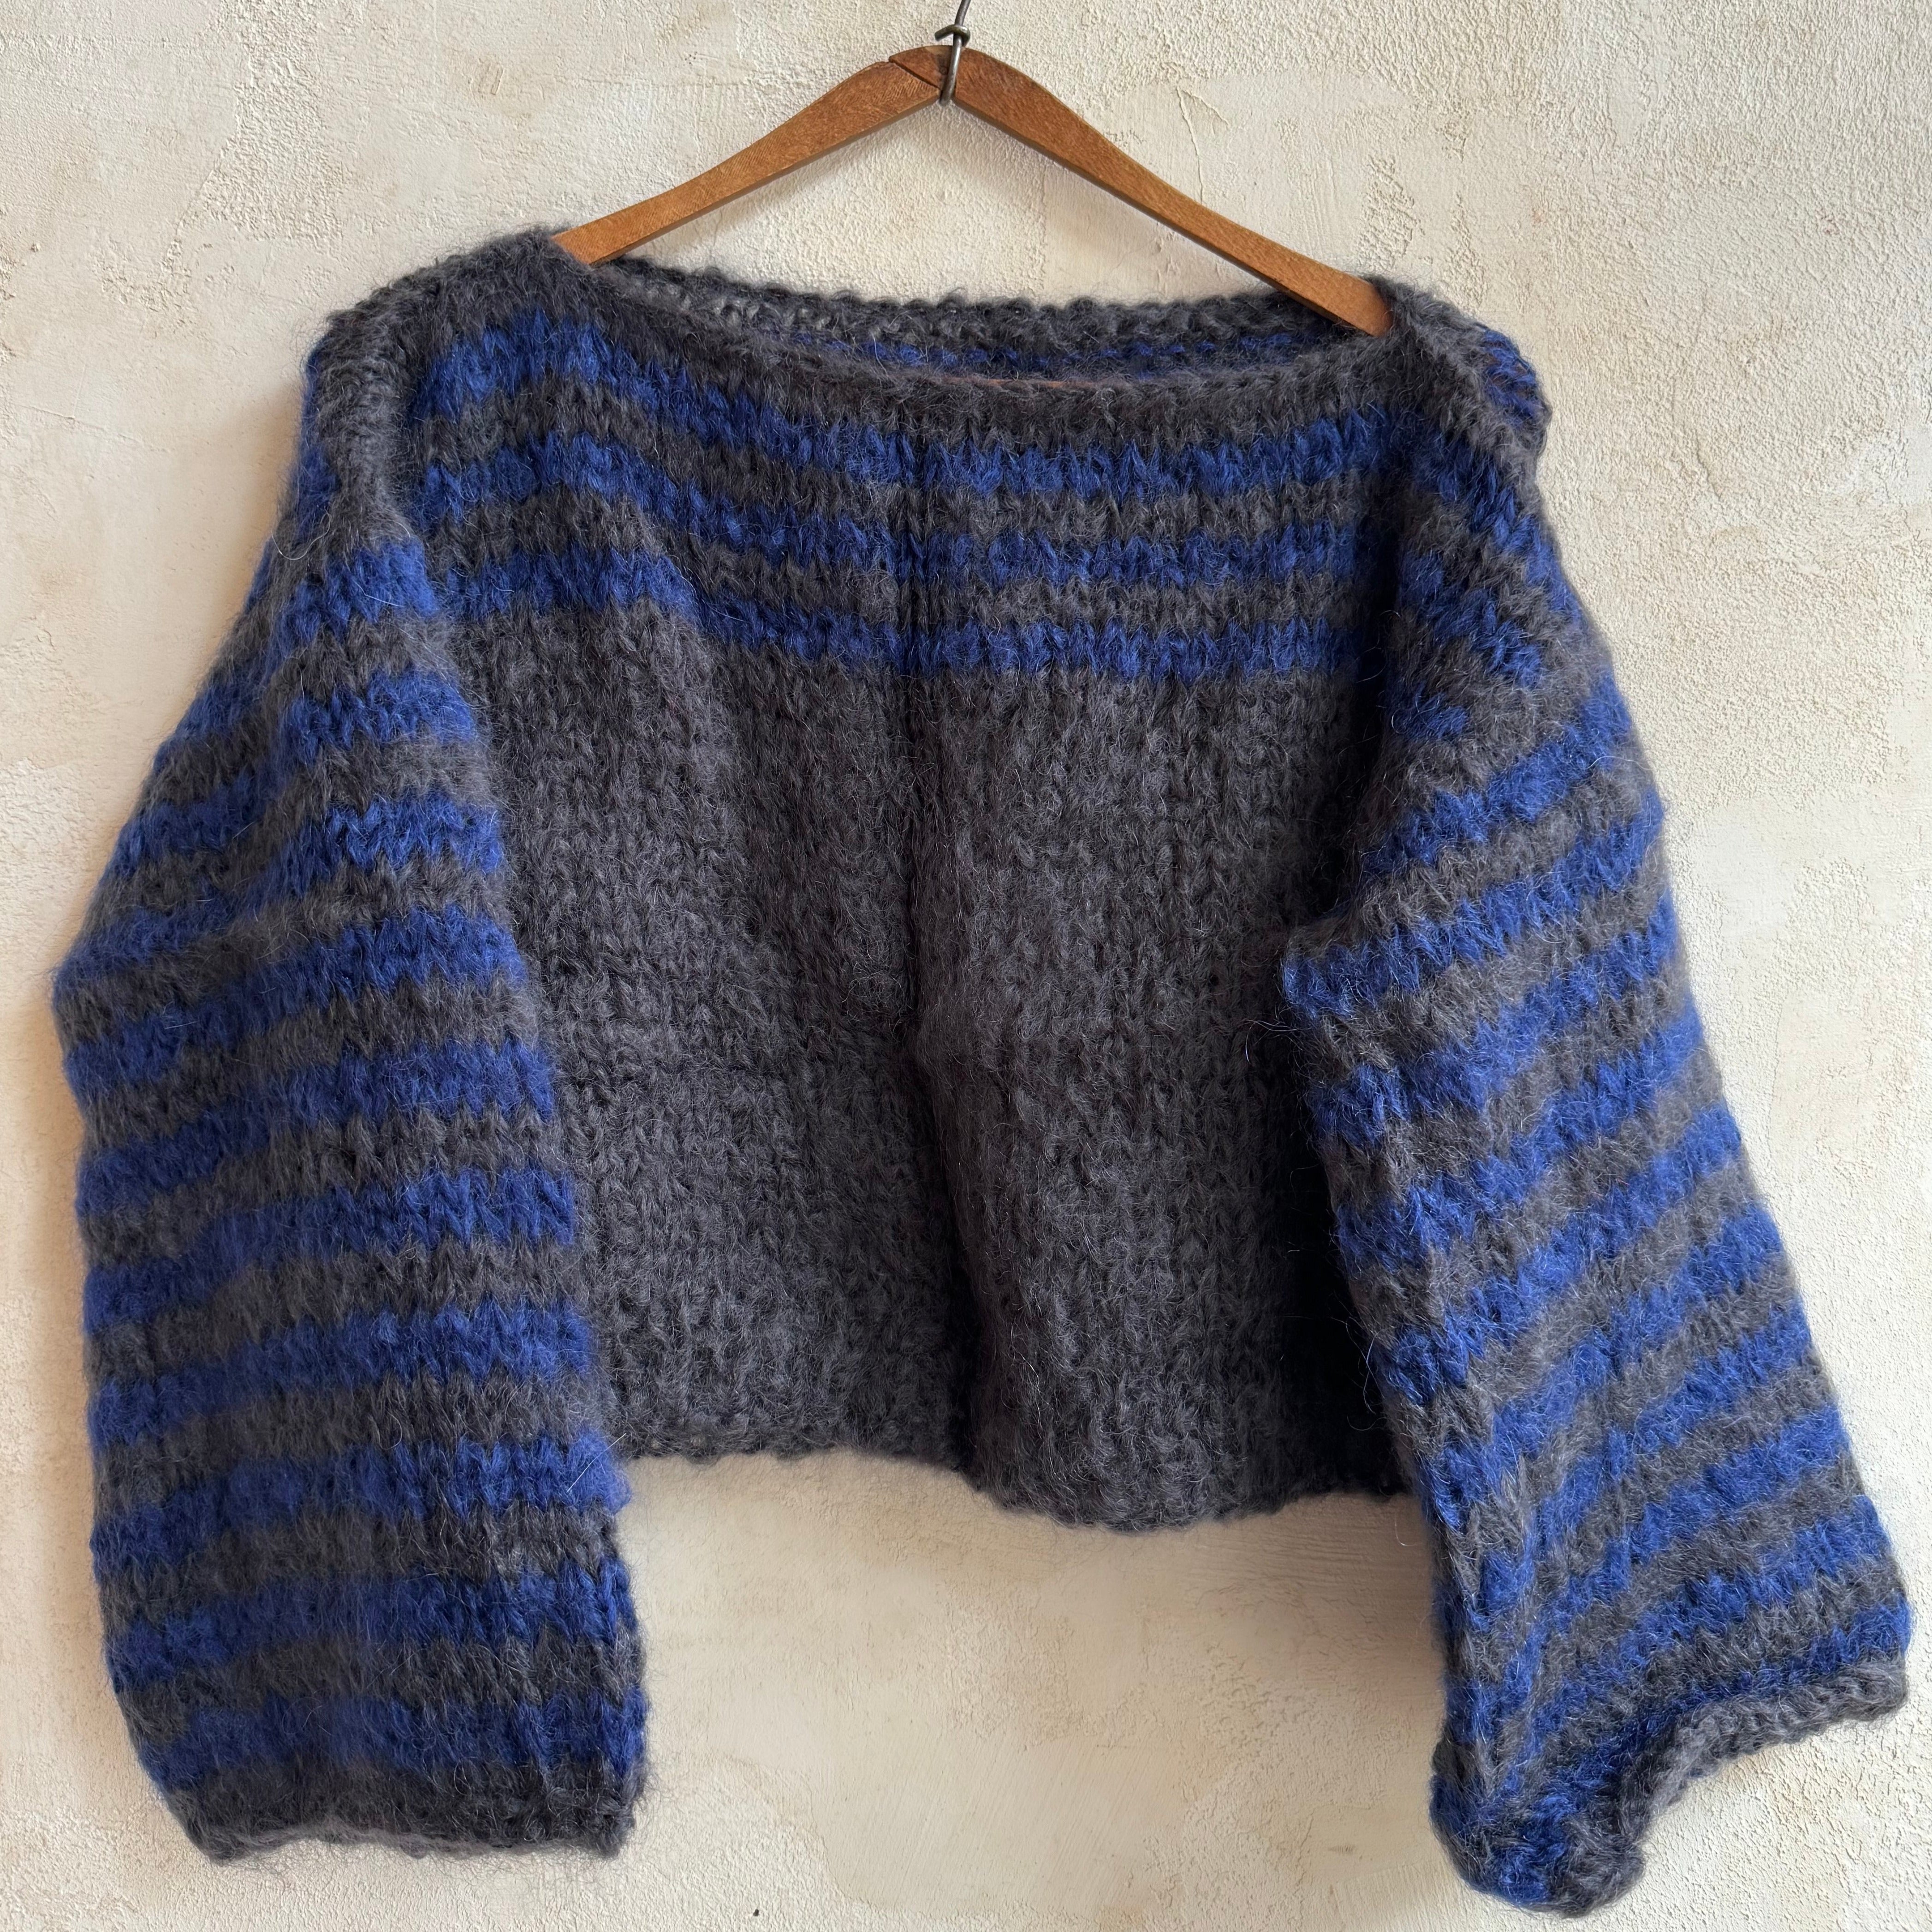 Charcoal Grey + Royal Blue Thick Stripe Sweater by Rayés